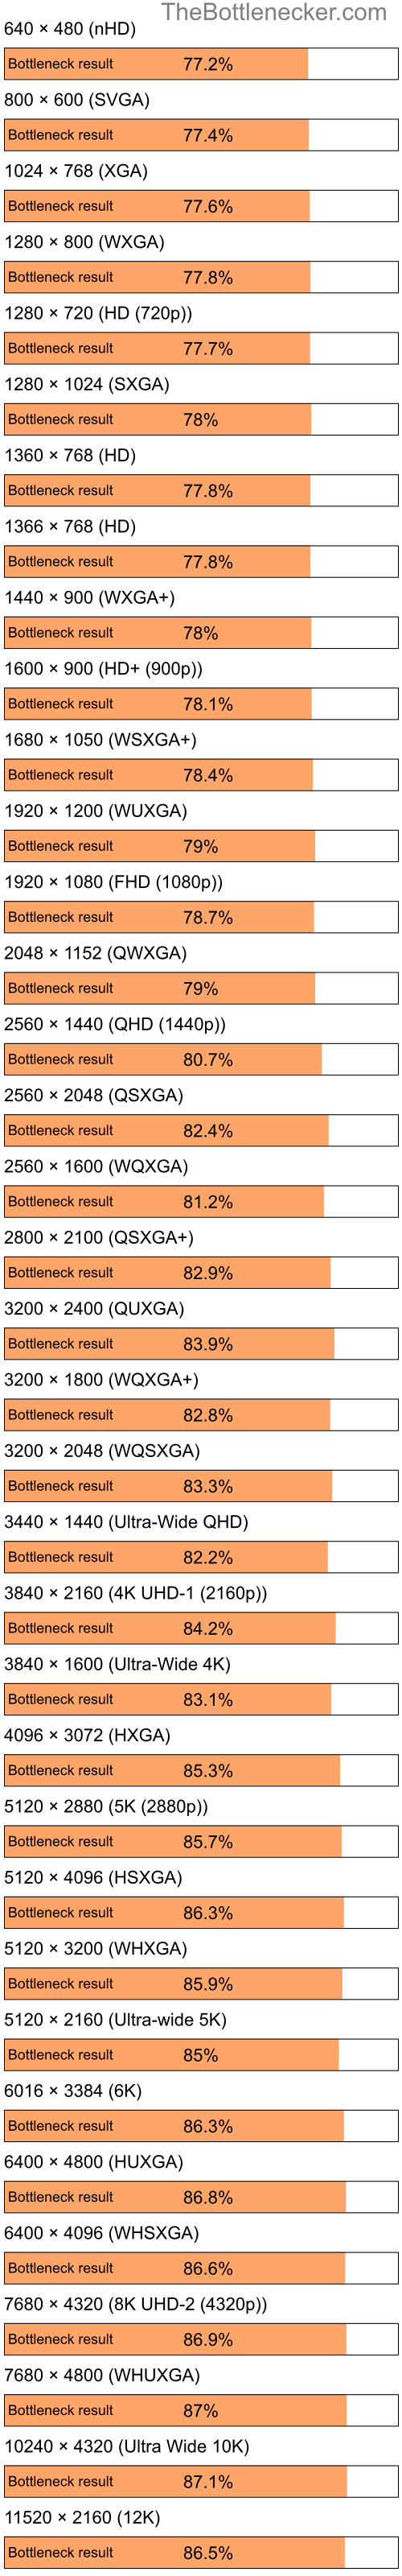 Bottleneck results by resolution for Intel Atom Z520 and NVIDIA GeForce Go 7300 in Graphic Card Intense Tasks